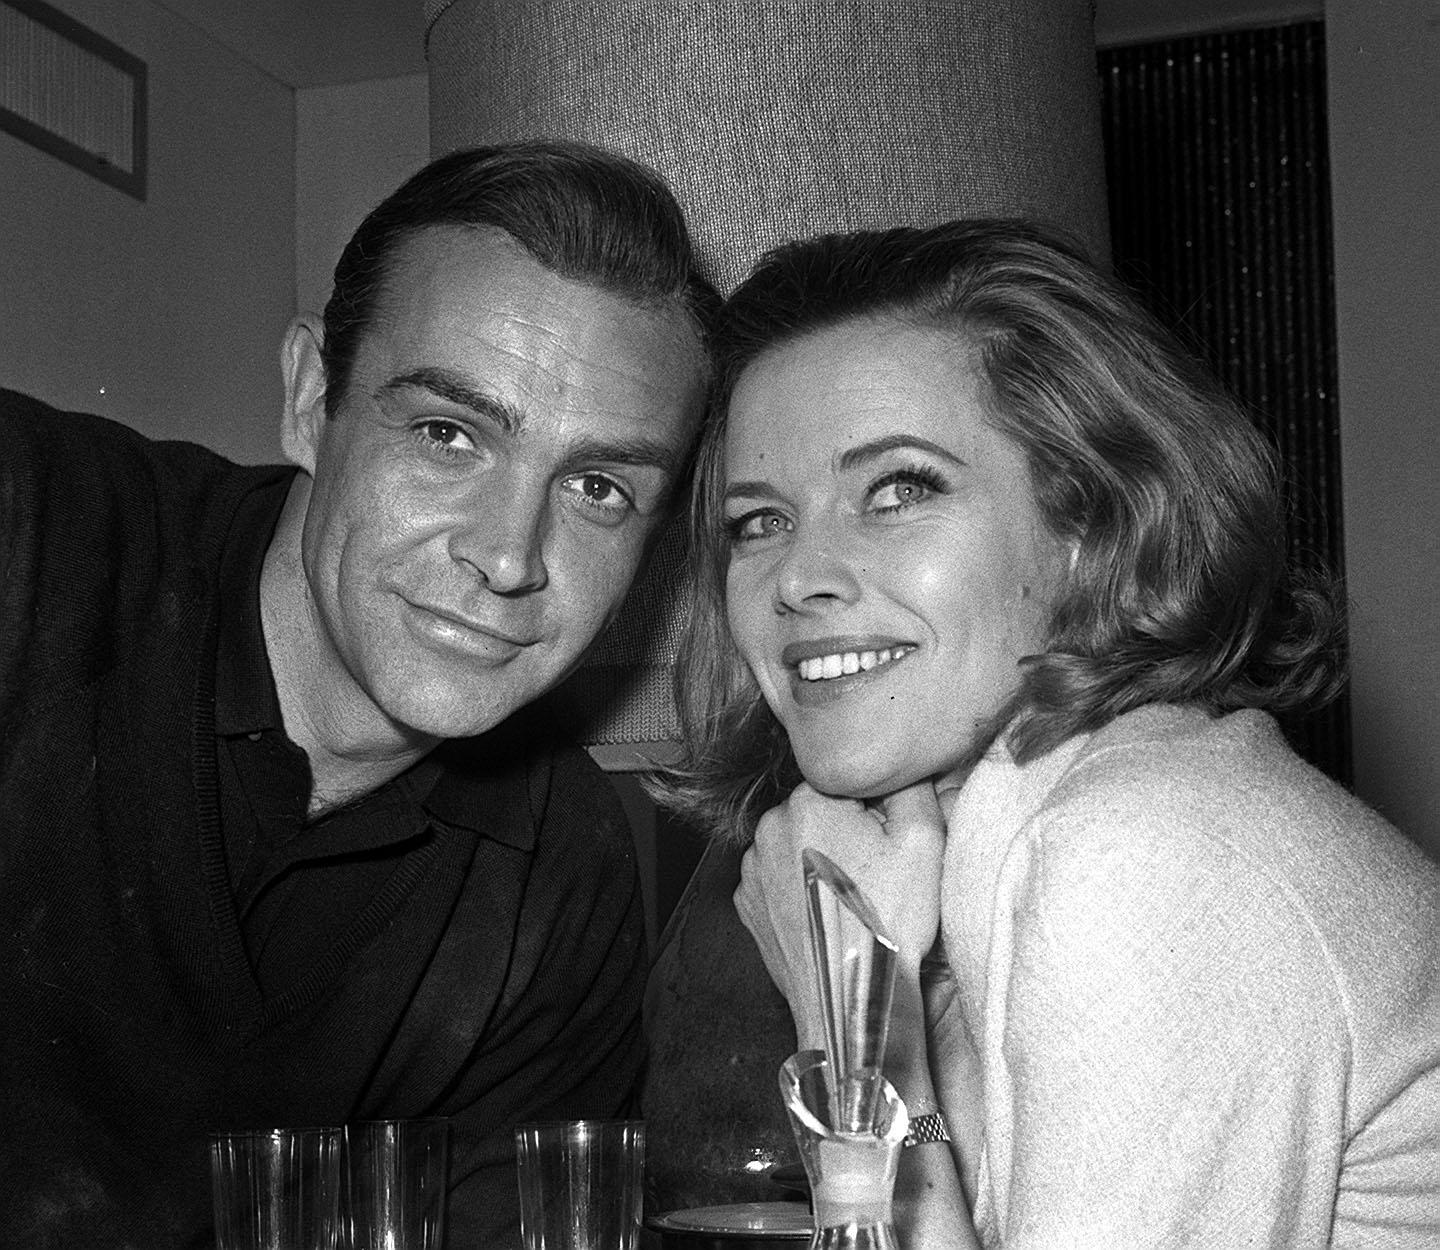 Honor Blackman (Pussy Galore) meets Sean Connery (James Bond) for the first time before filming of the third Bond movie 'Goldfinger'.